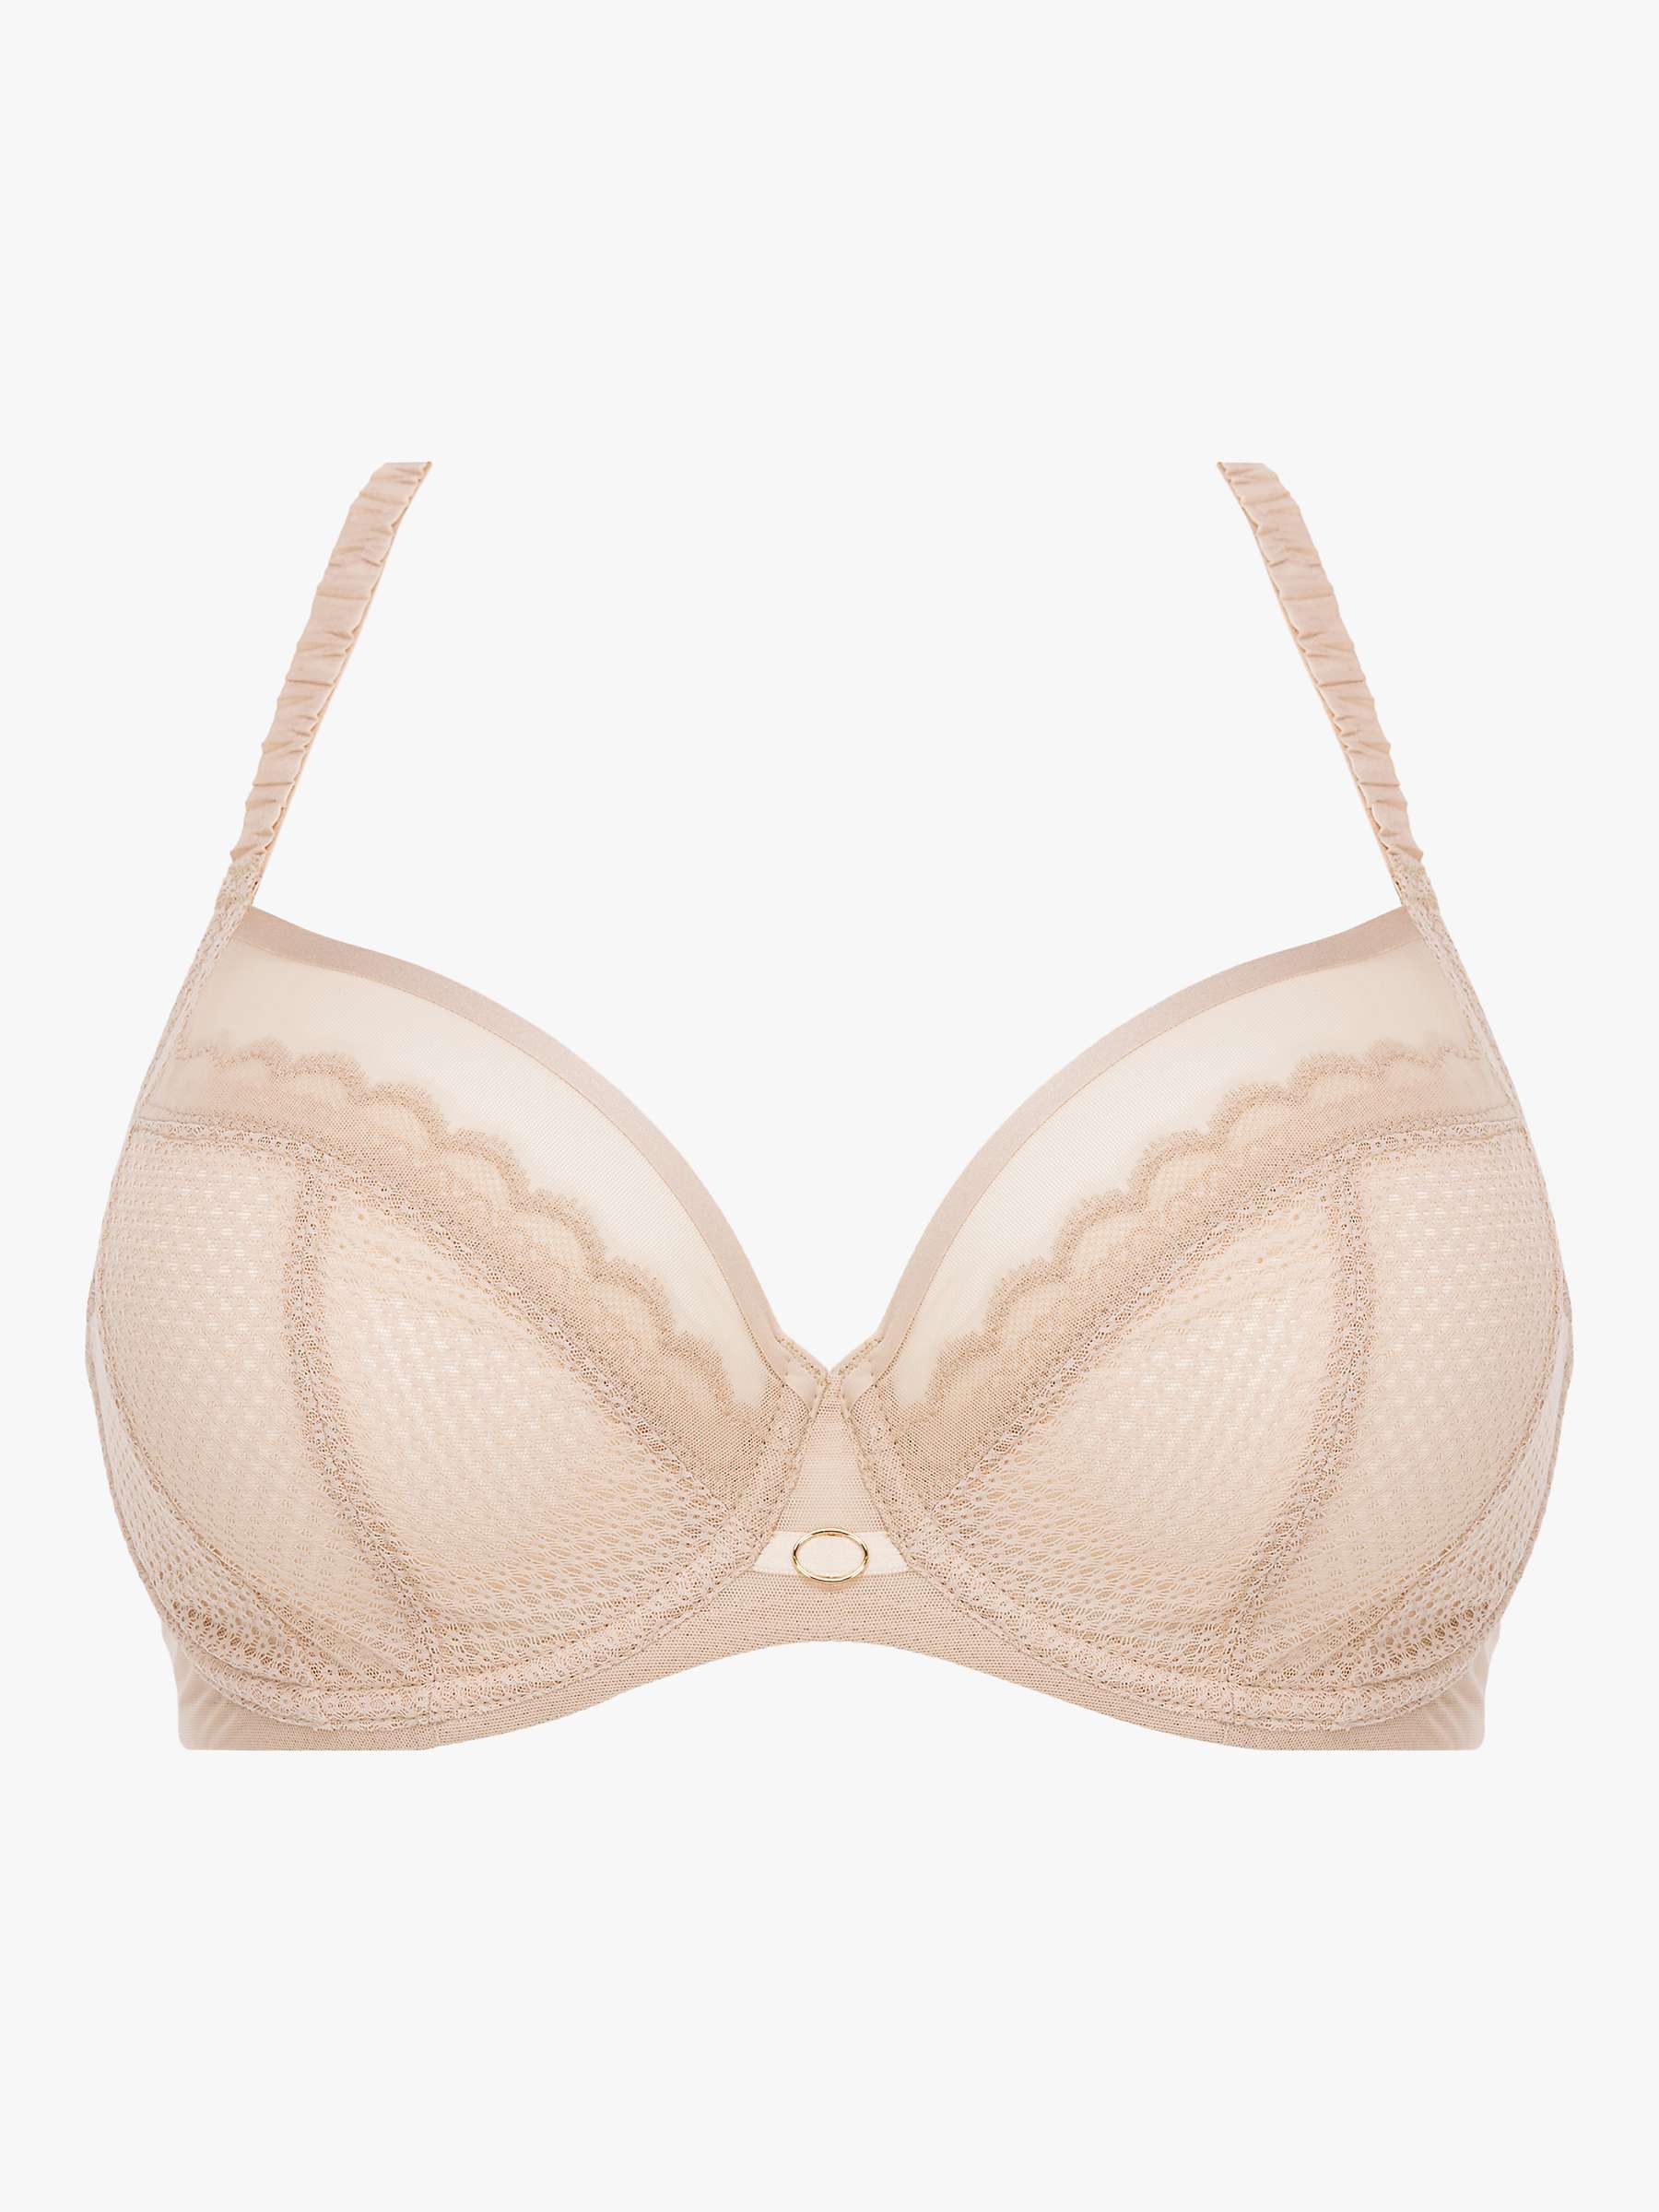 Buy Chantelle Parisian Allure Covering Underwired Bra Online at johnlewis.com